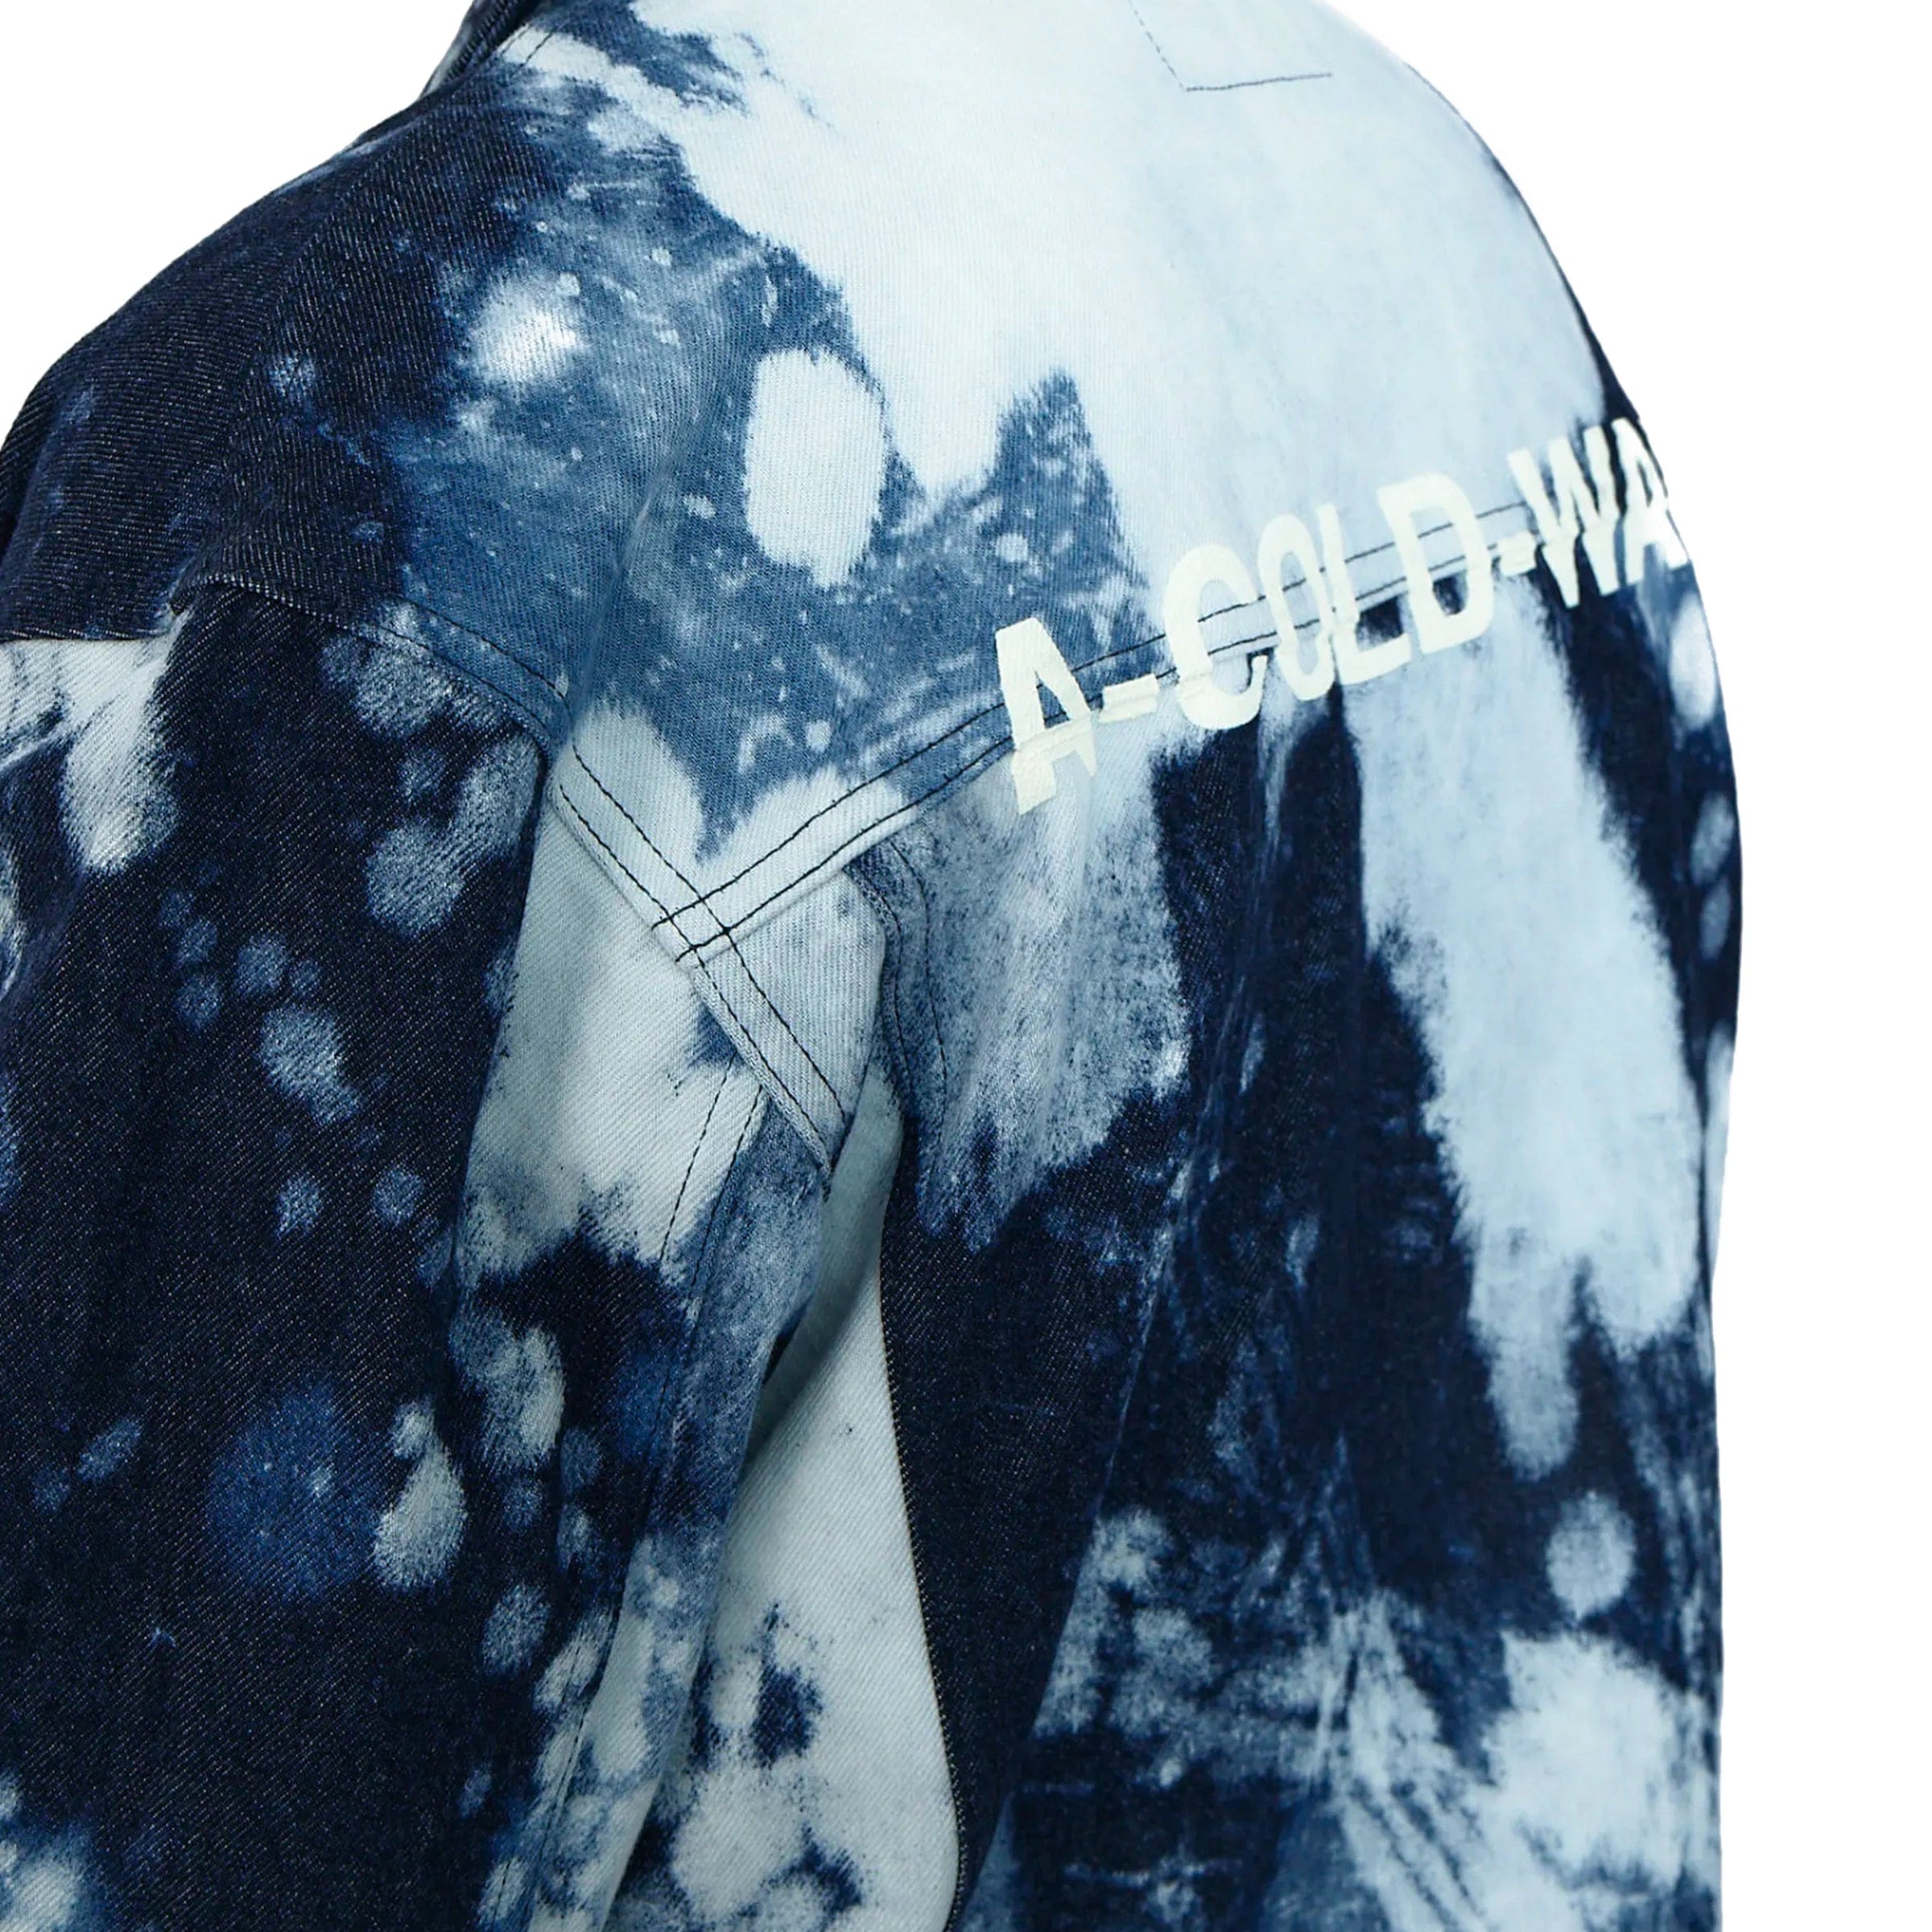 Men Western Patch Denim Shirt Composed Of Distressed Bleached Denim  Dramatized Grafitti Scribbles And Designs Shirt234r From Frank0098, $41.62  | DHgate.Com